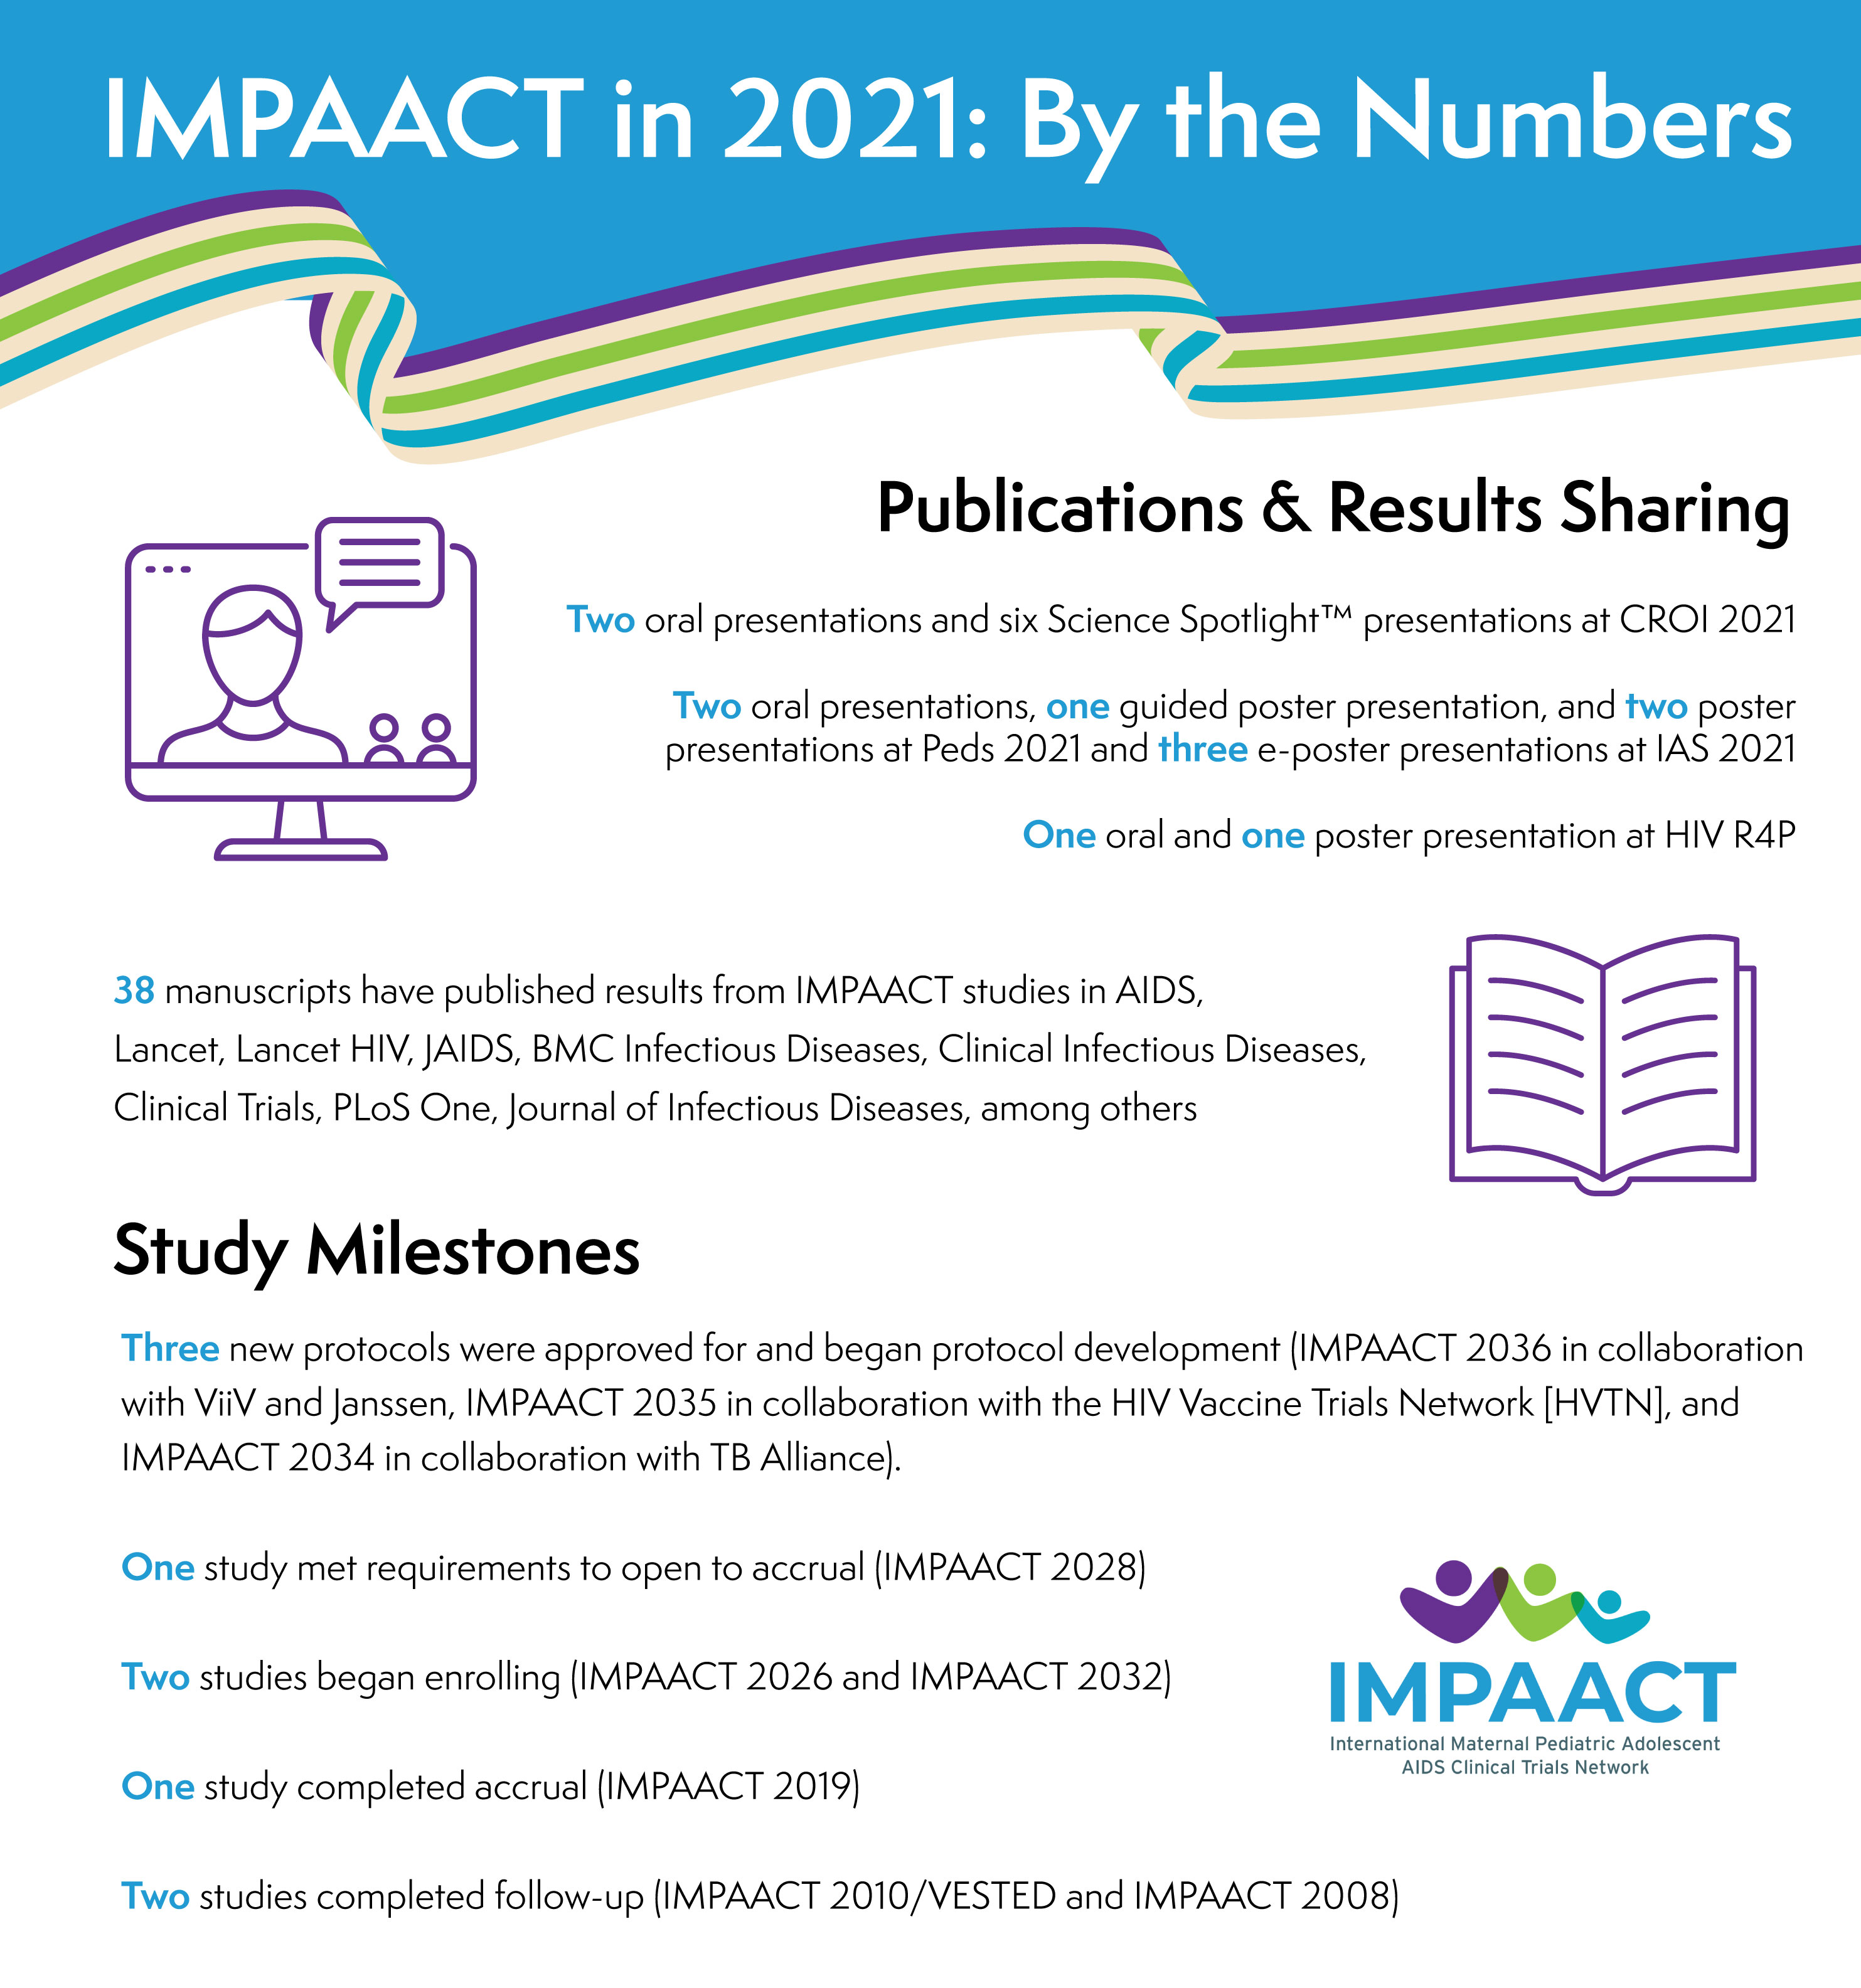 IMPAACT 2021 by the numbers